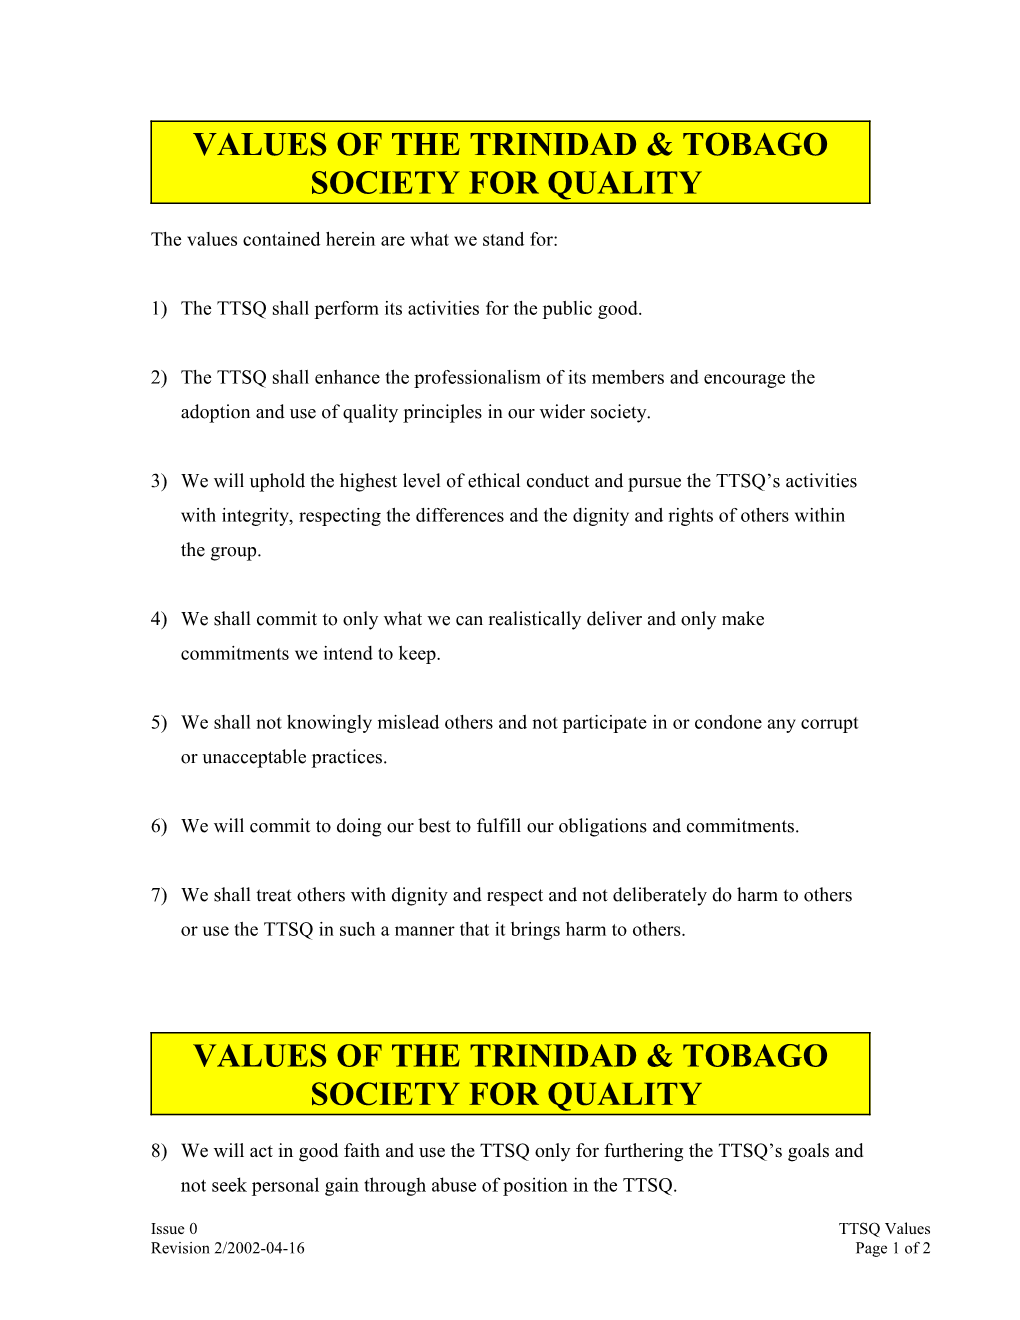 Values of the Quality Society